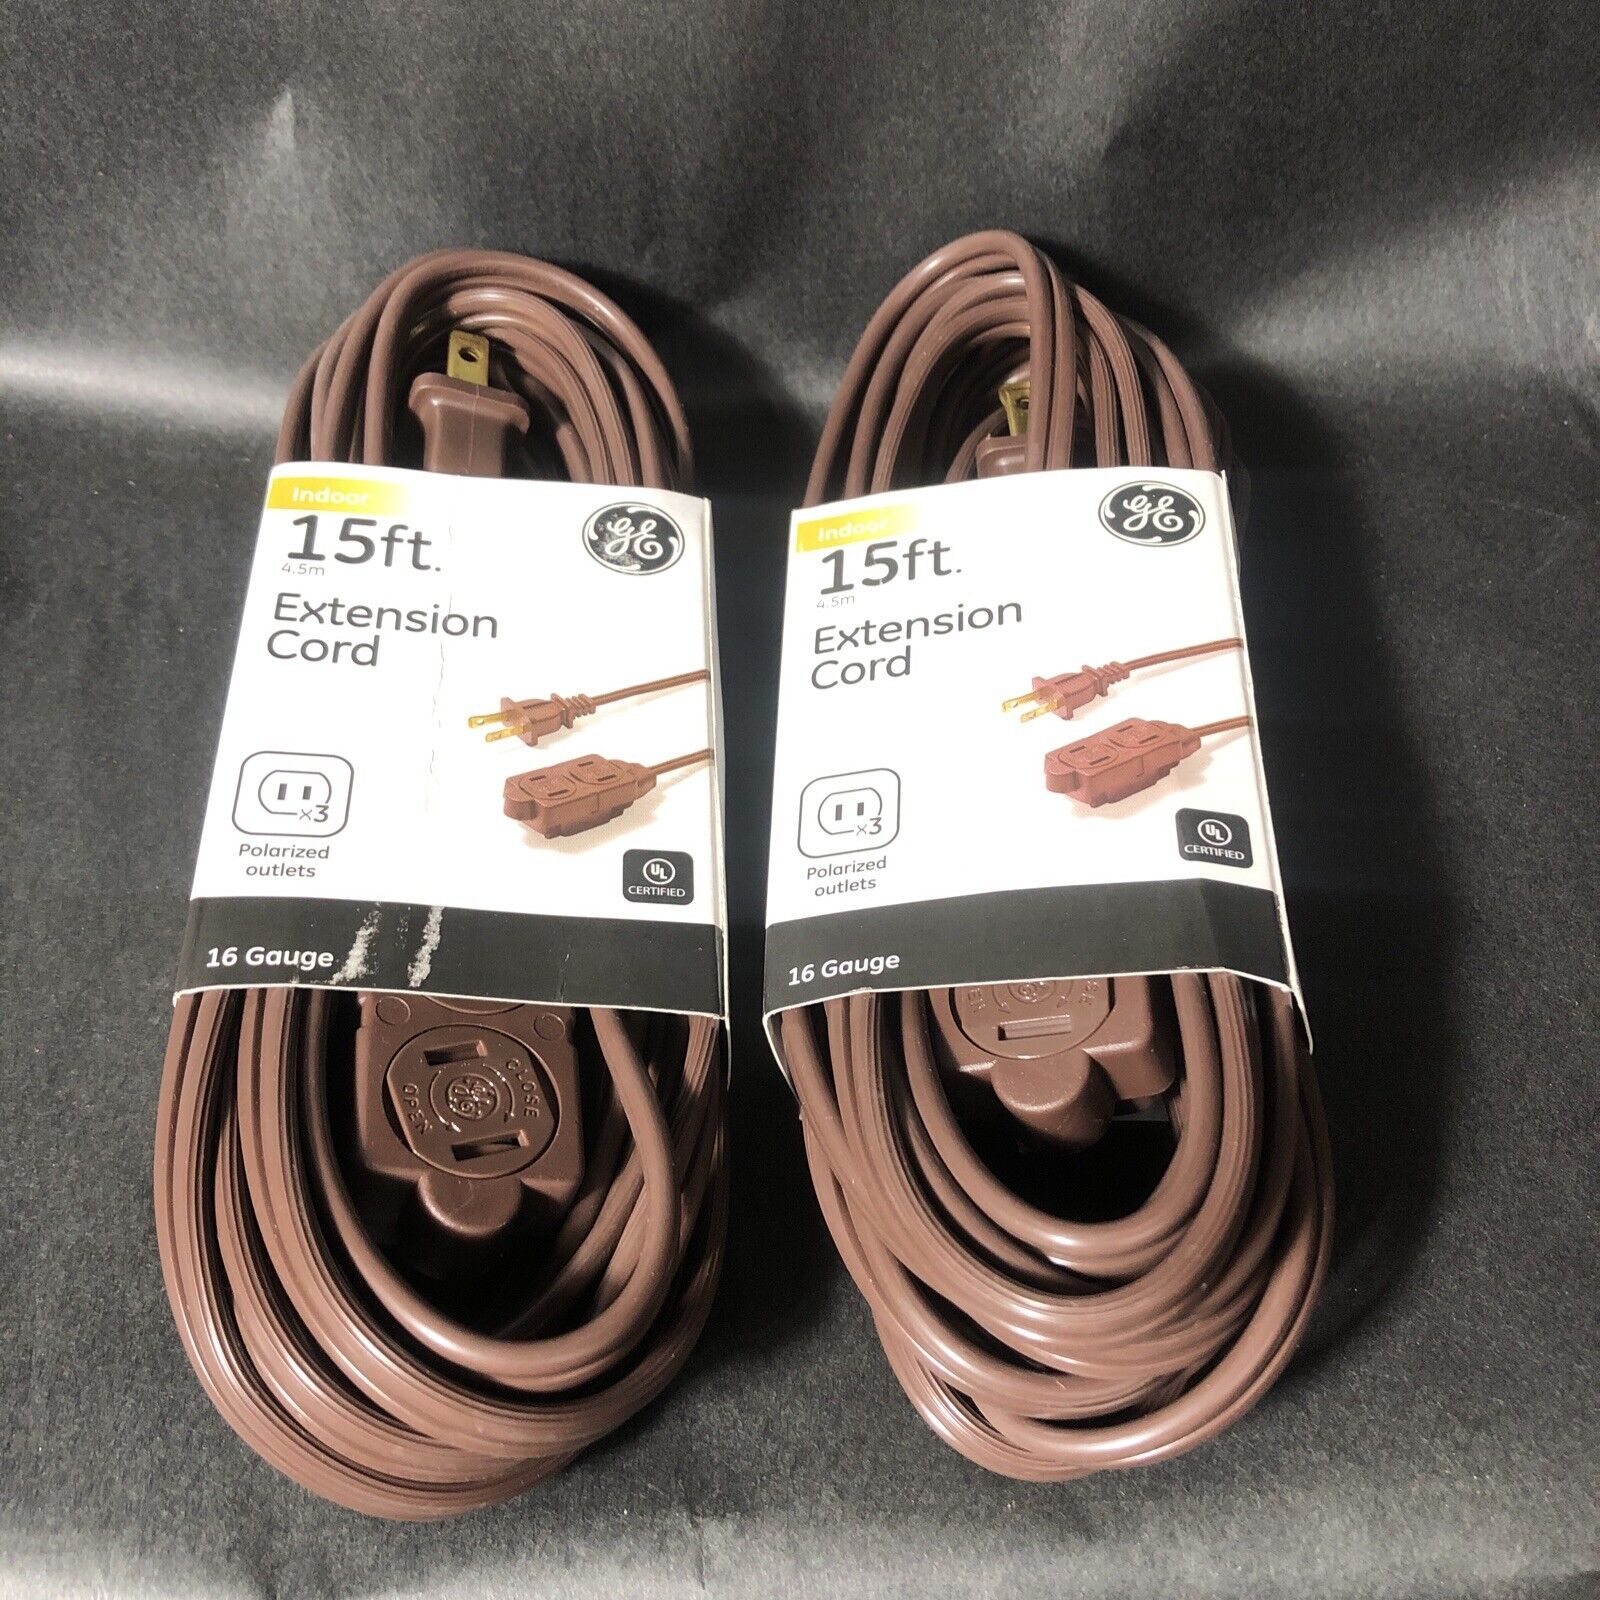 2- GE 15-Feet Polarized Indoor Extension Cord with Tamper Guard, Brown BW4